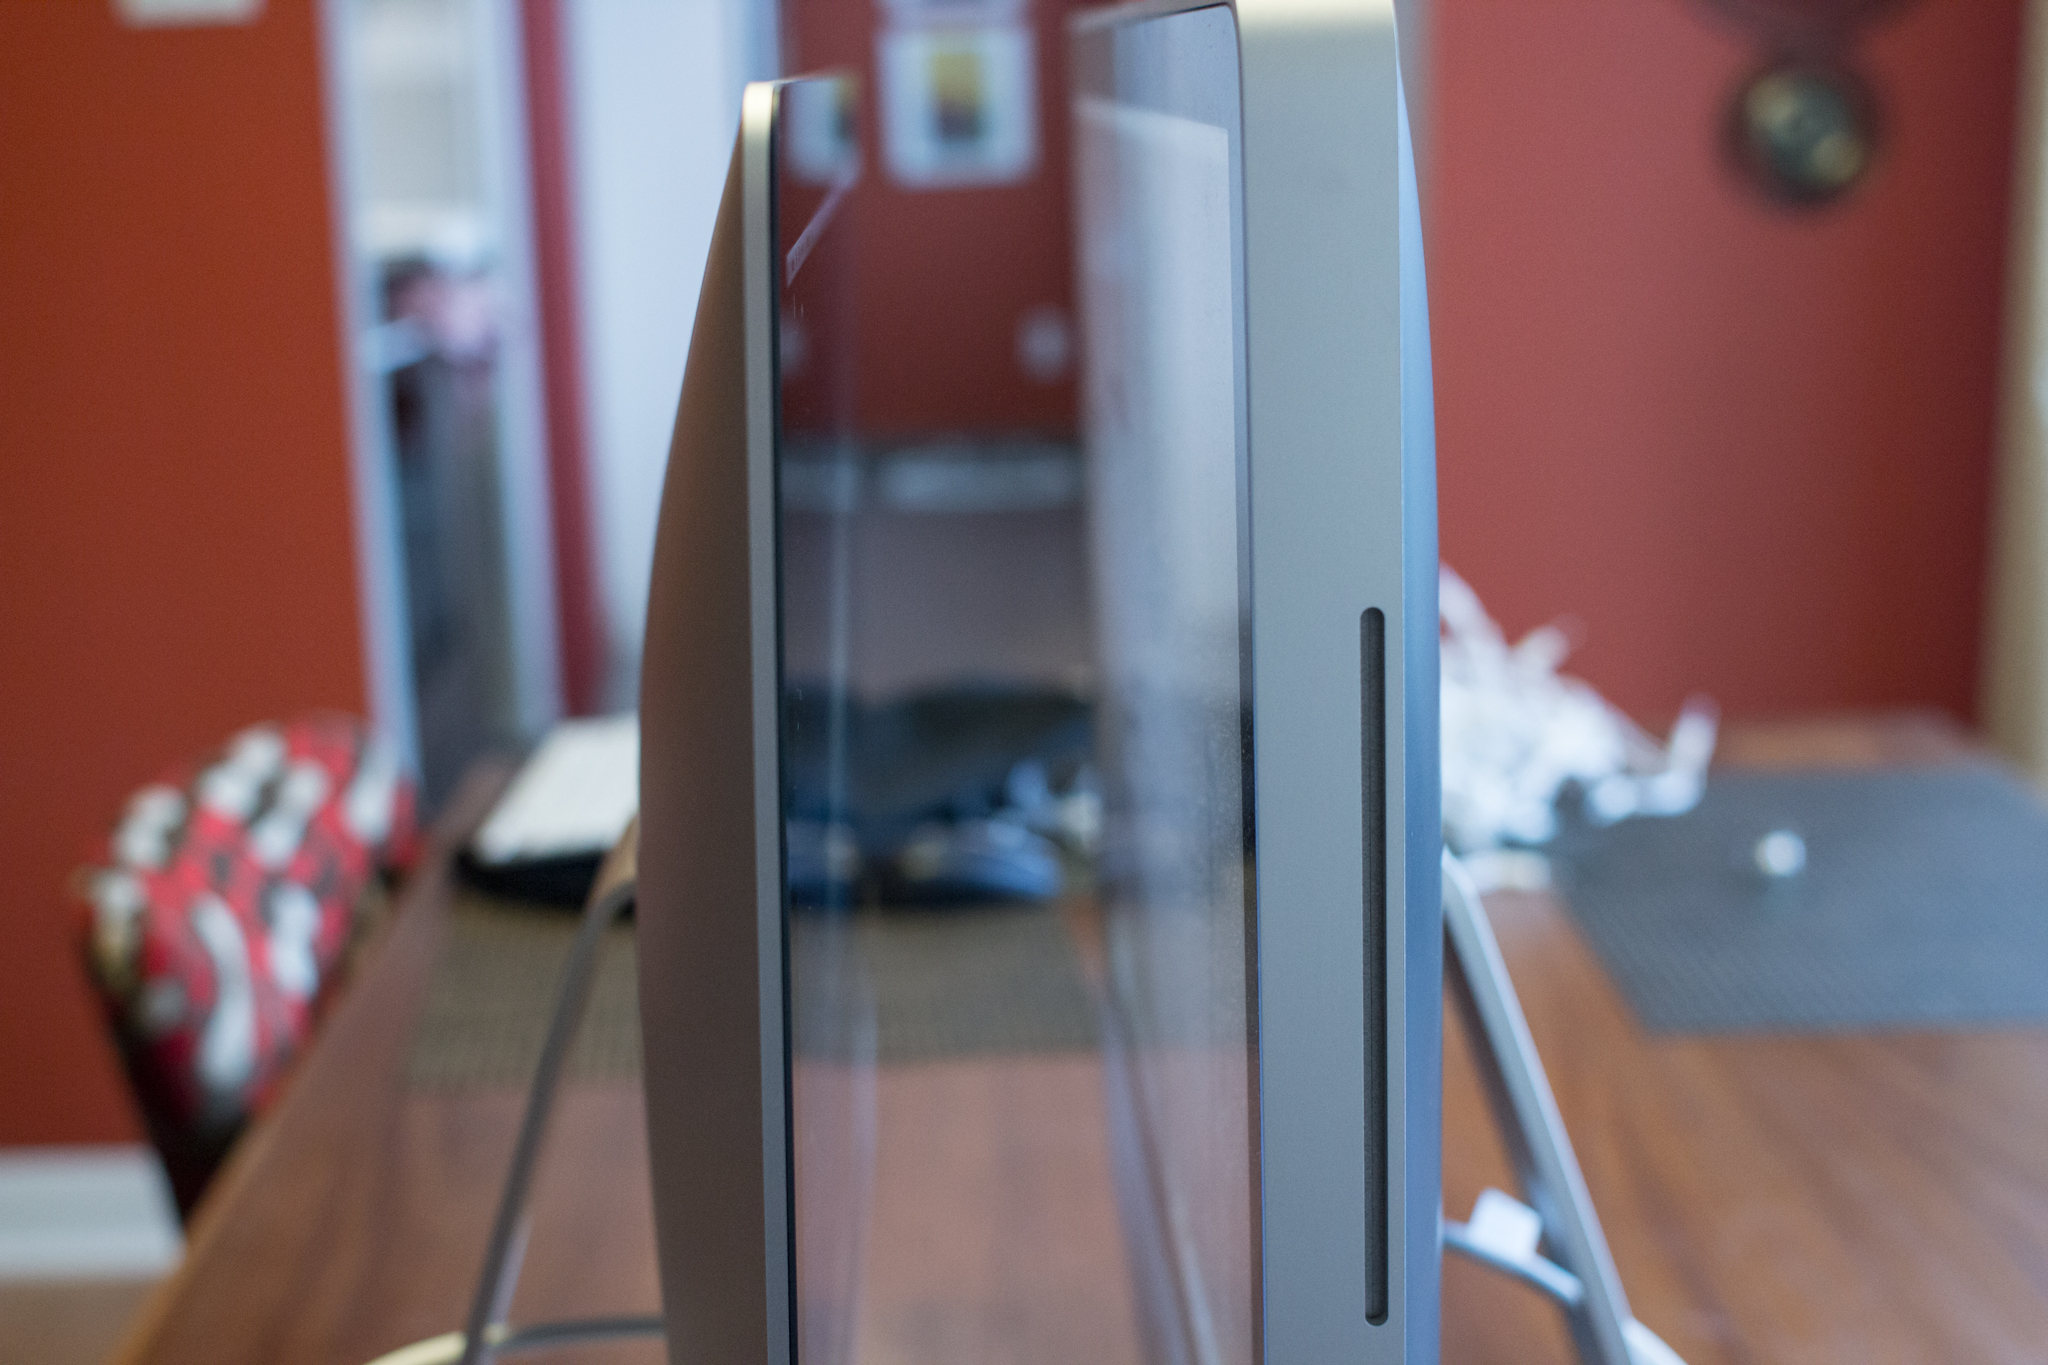 2008 iMac (right) and 2012 iMac (left) thickness comparison